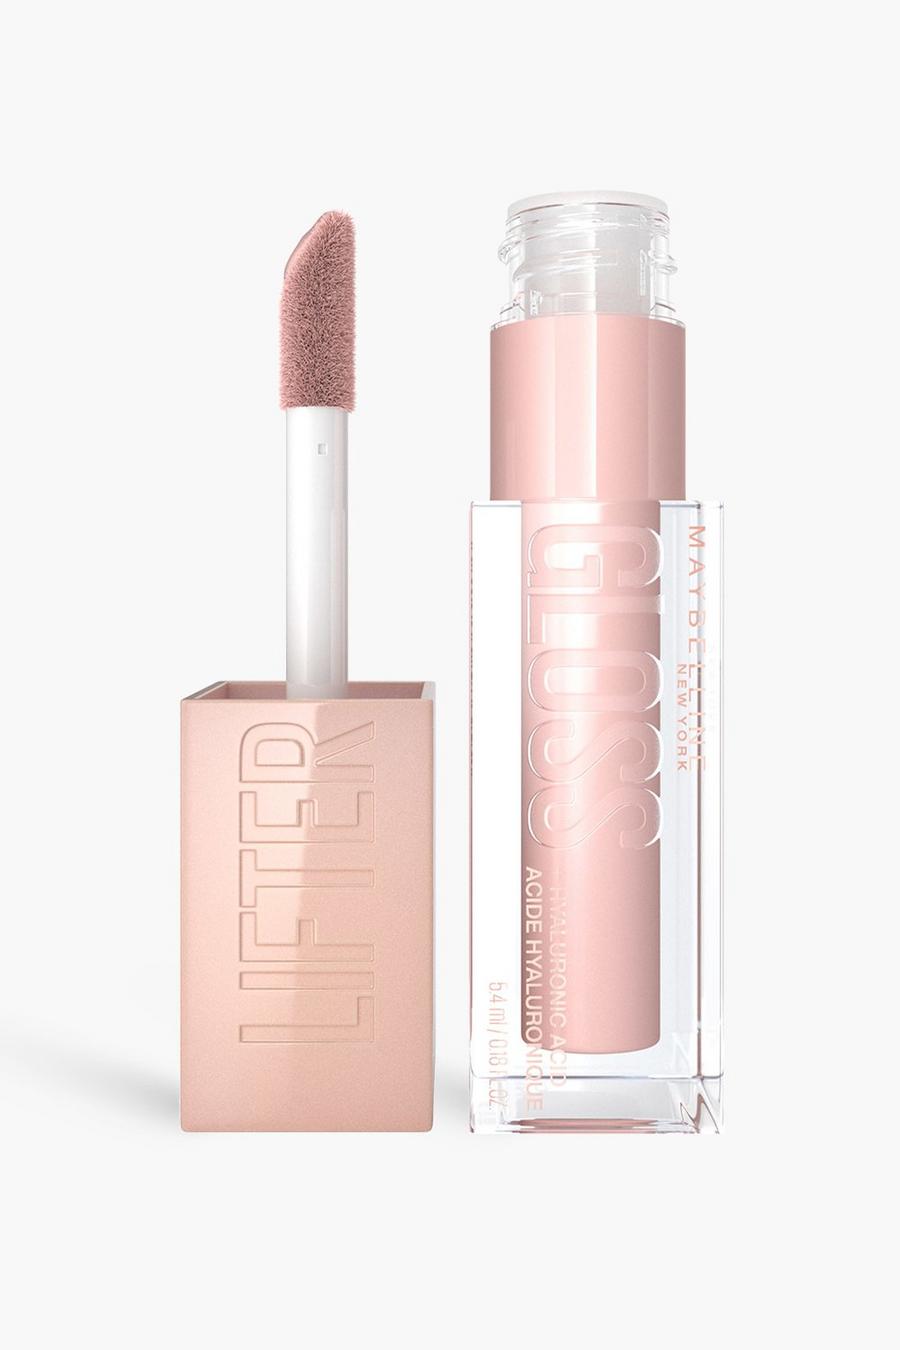 Nude Maybelline Lifter Gloss  Plumping Hydrating Lip Gloss - 002 Ice